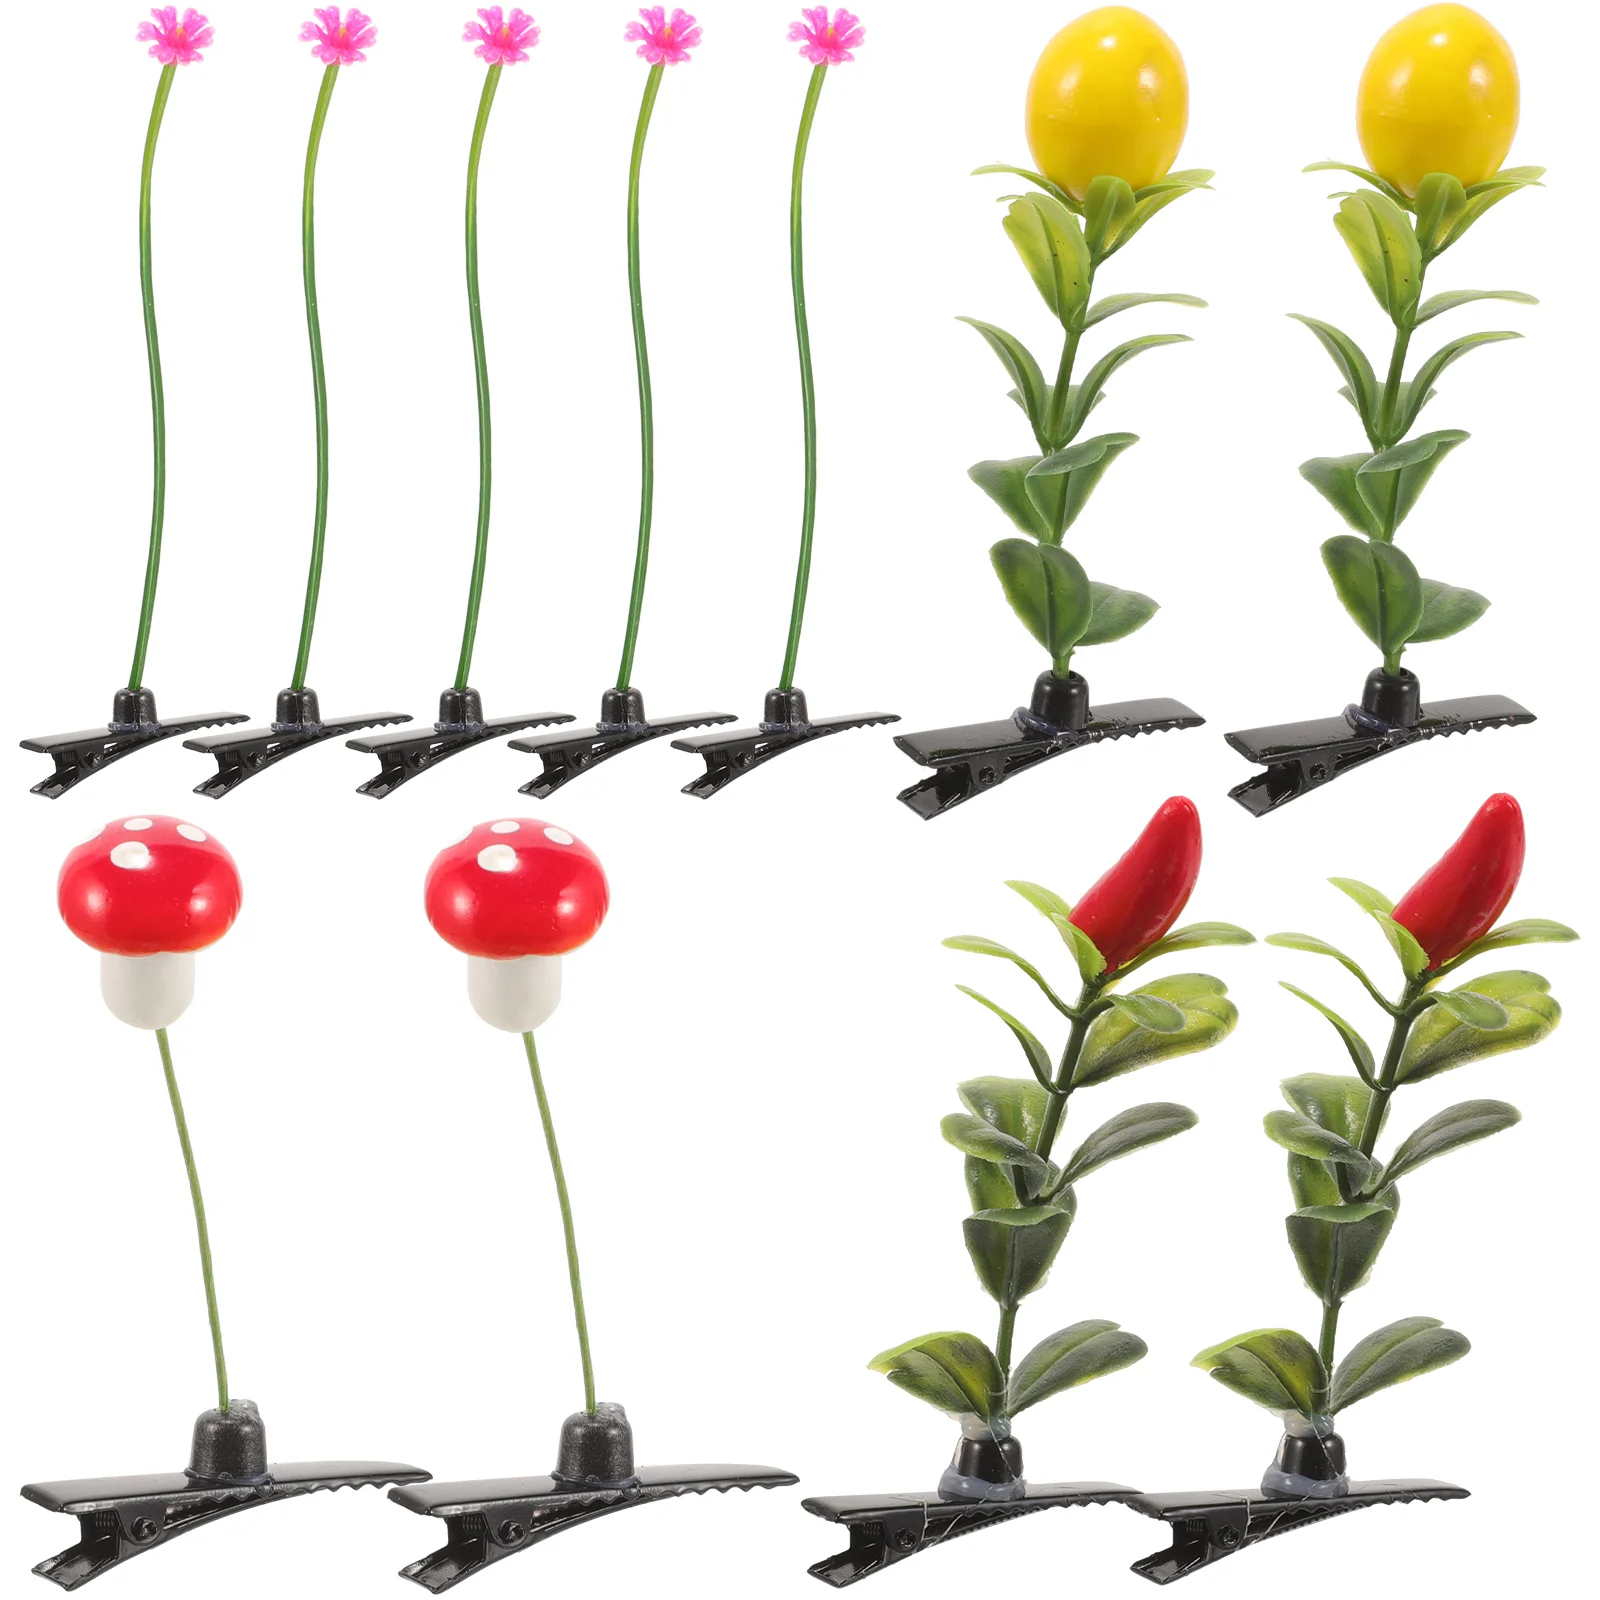 

30 Pcs Hair Pin Grass Hairpin Plant Clips Lovely Mini Bean Sprout Small Funny Hairpins Trendy Sprouts